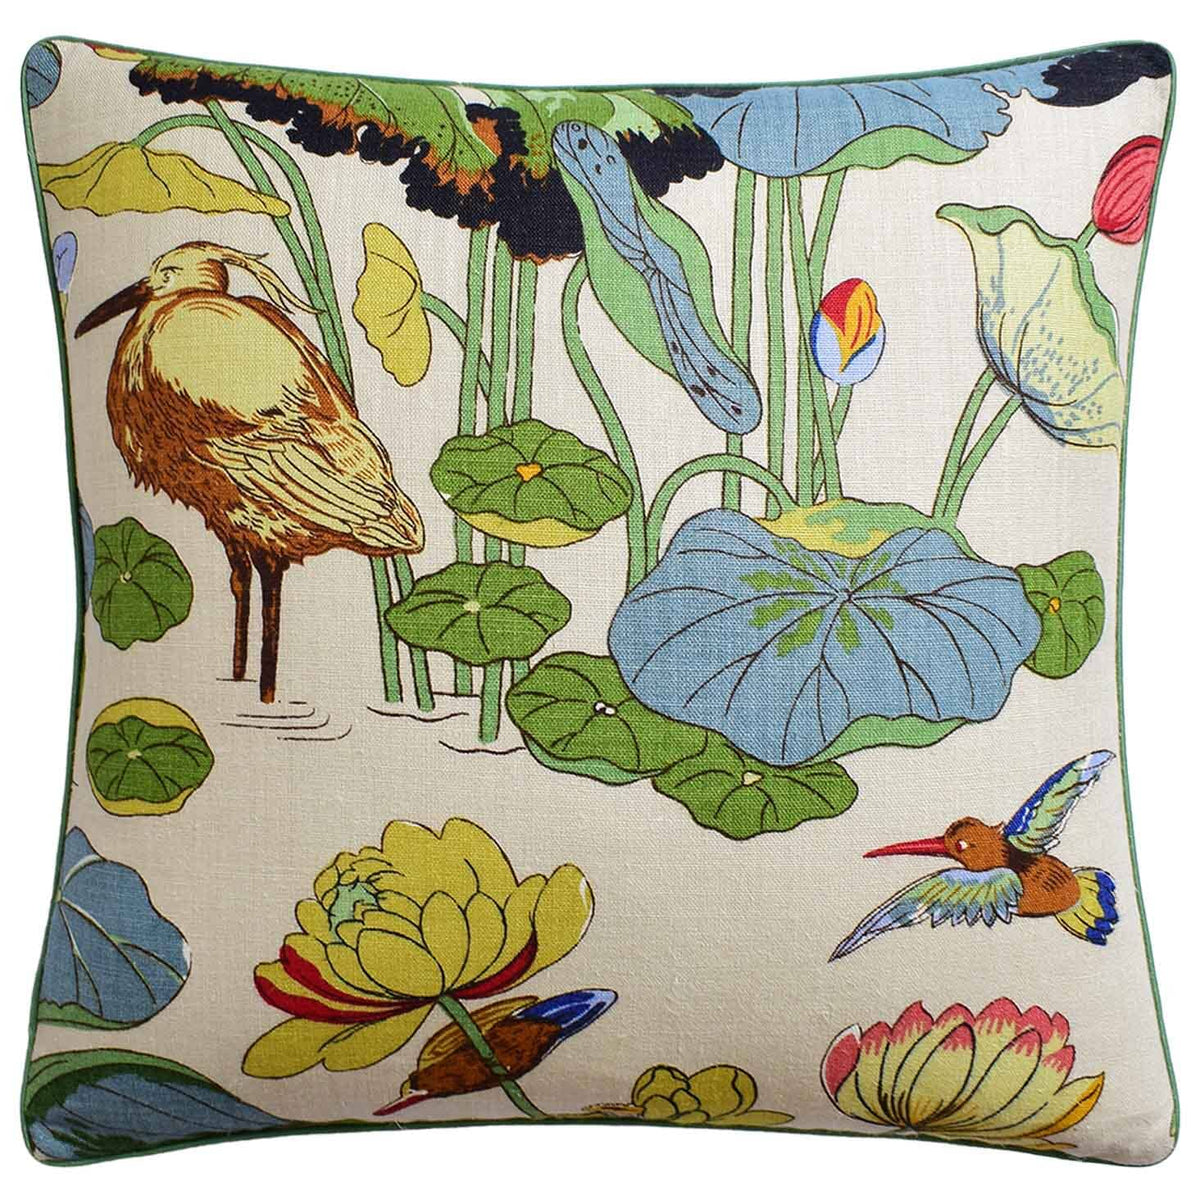 Nympheus Stone and Pistachio Pillow - Throw Pillow by Ryan Studio Fabric by GP and J Baker